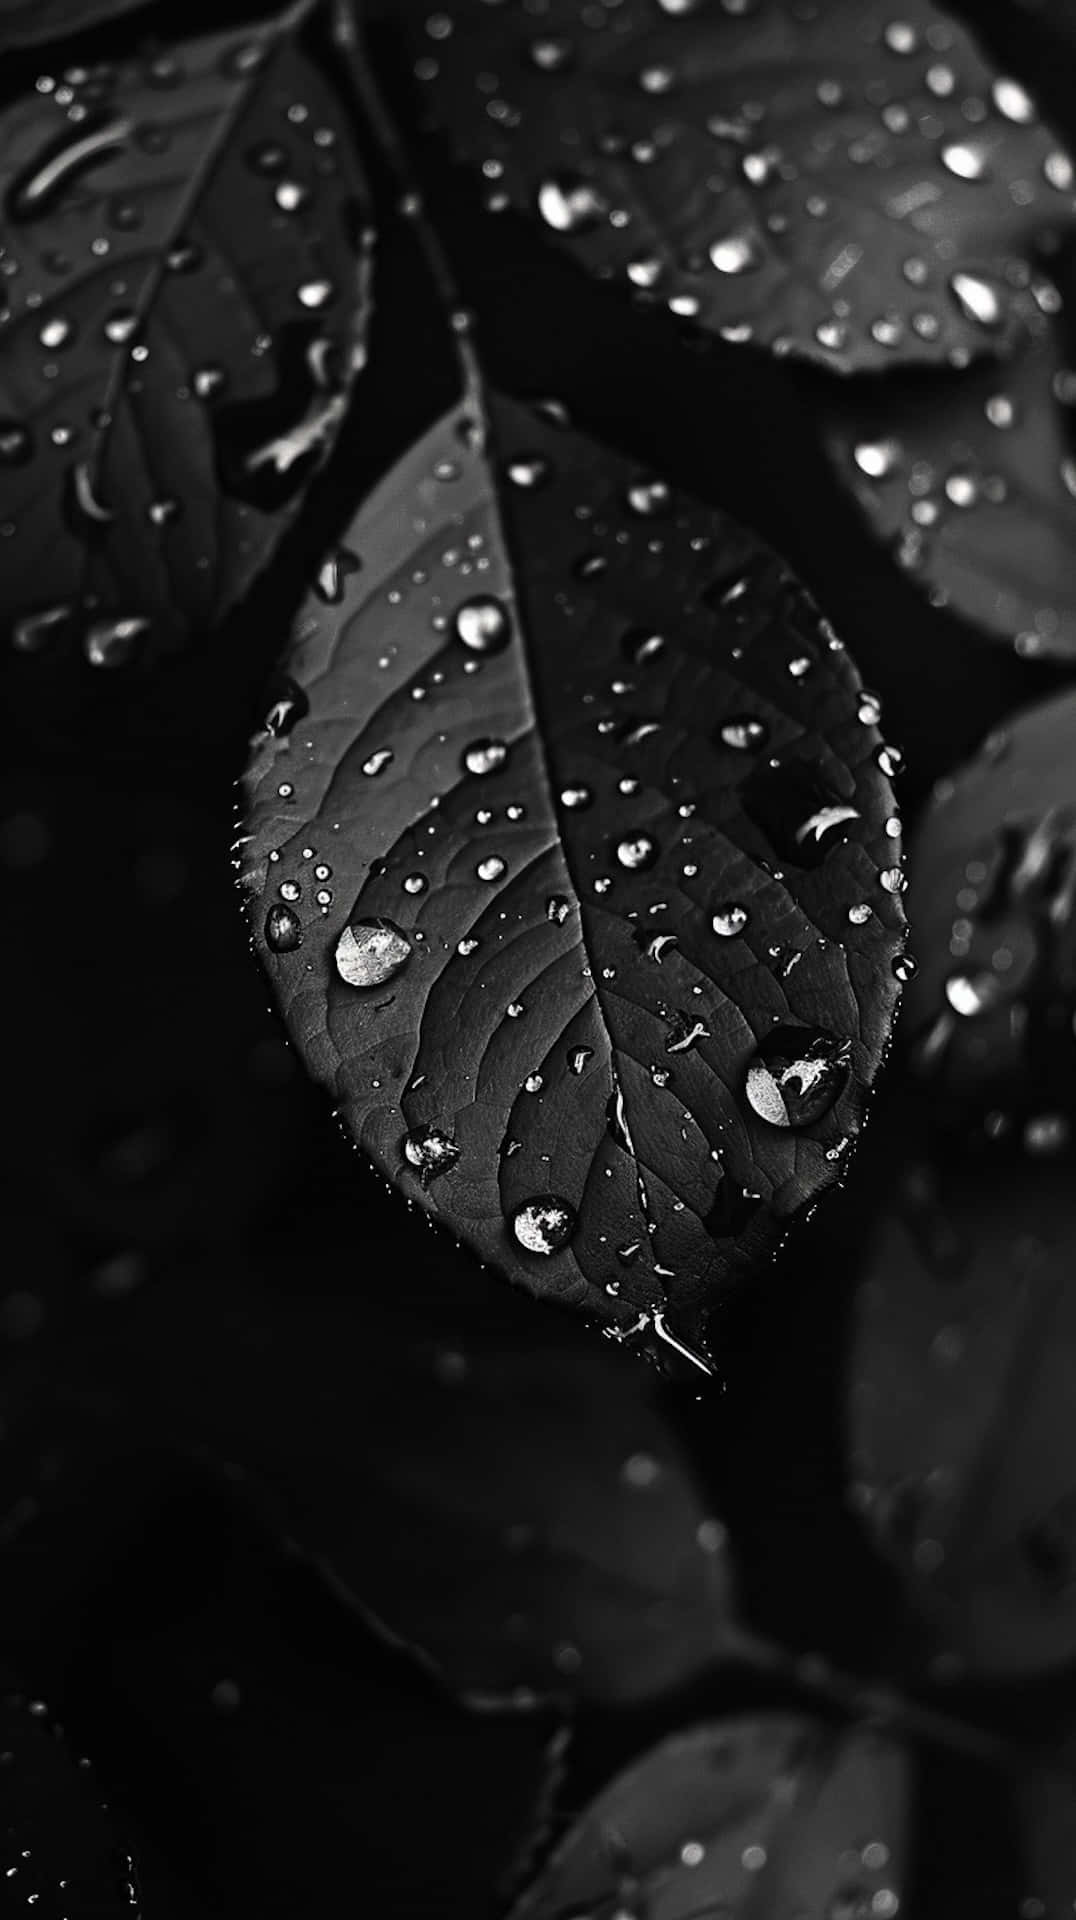 Blackand White Leaveswith Water Droplets Wallpaper